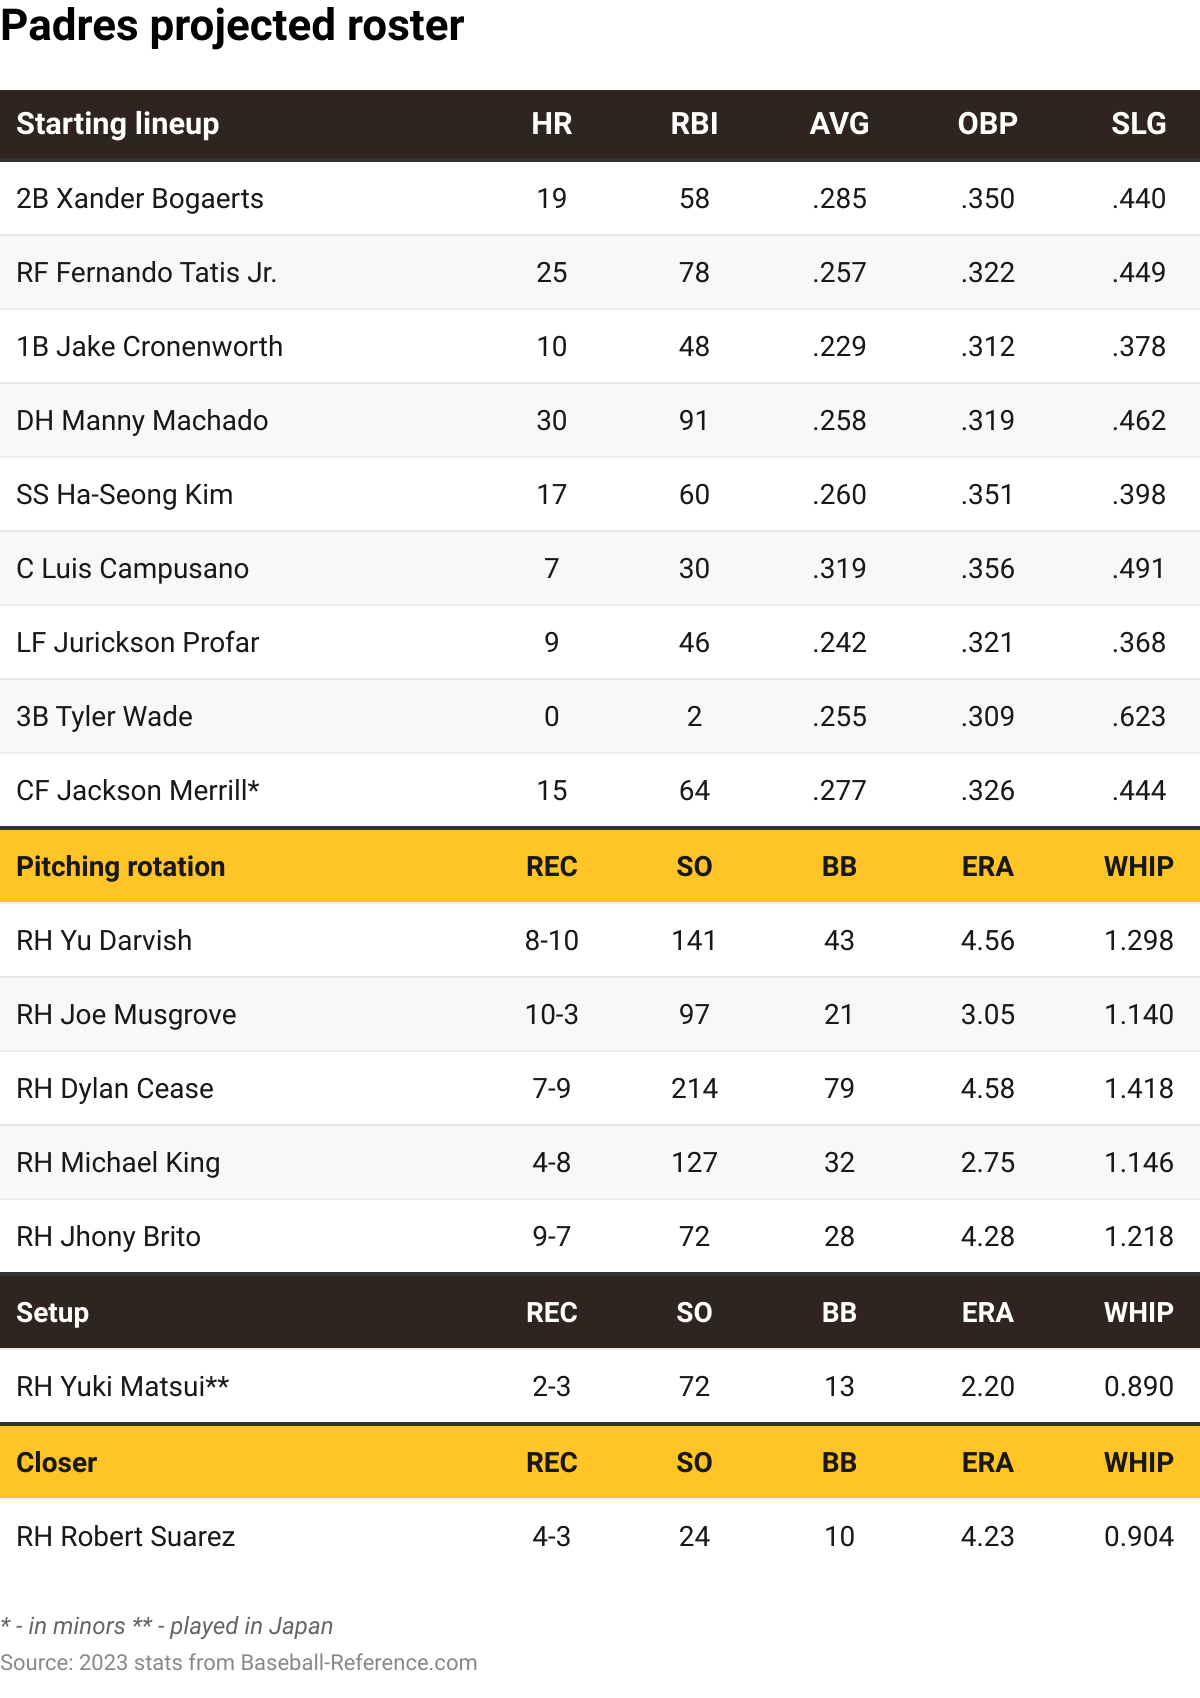 The San Diego Padres' project 2024 lineup with 2023 stats.